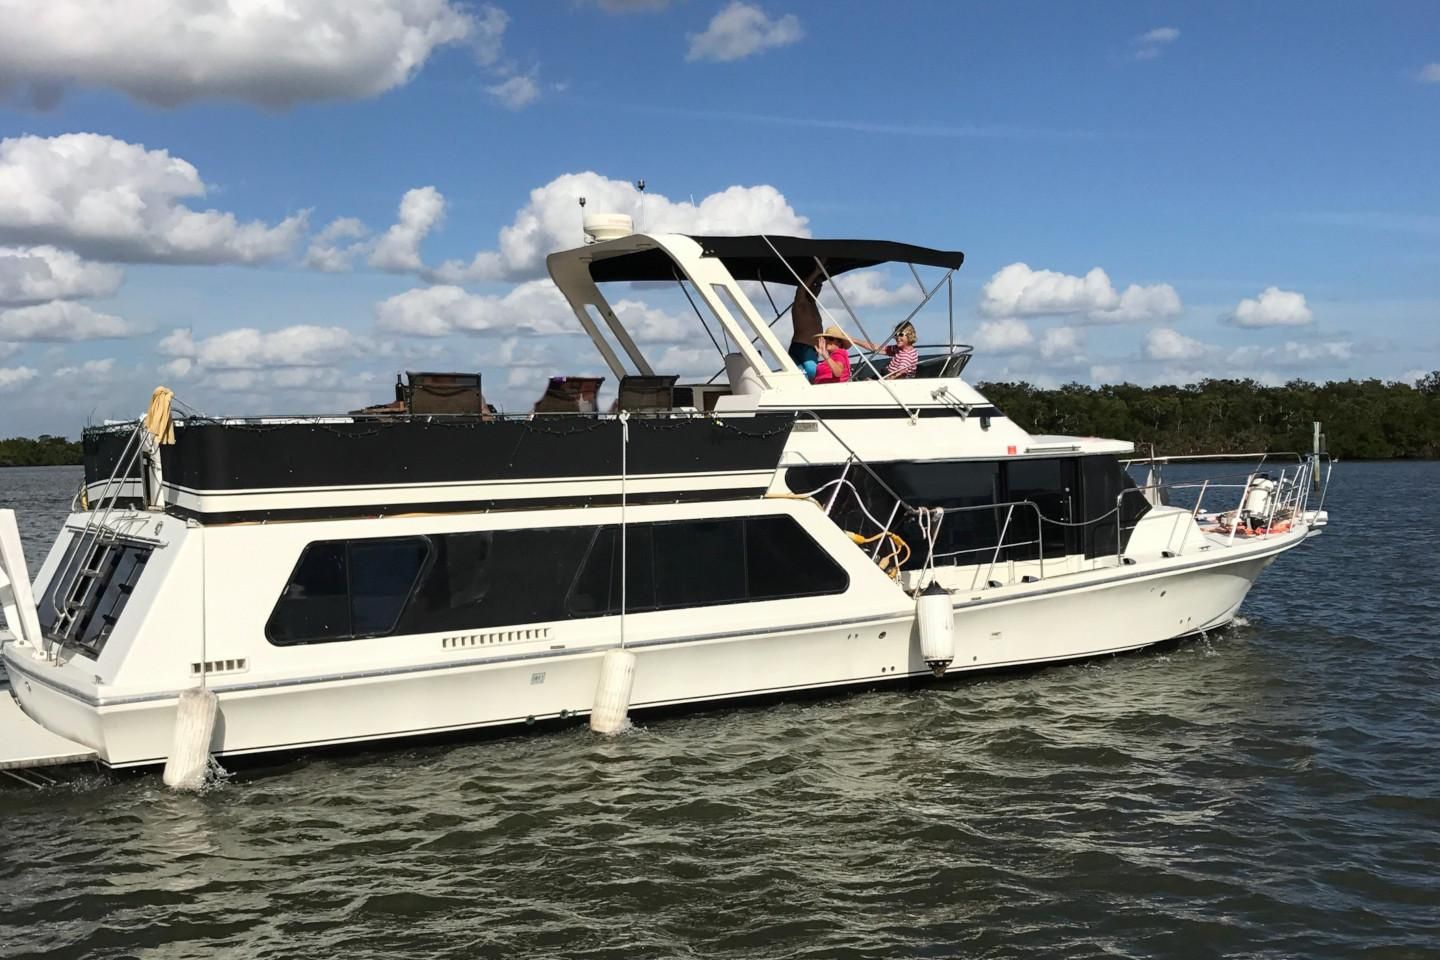 51 ft bluewater yacht